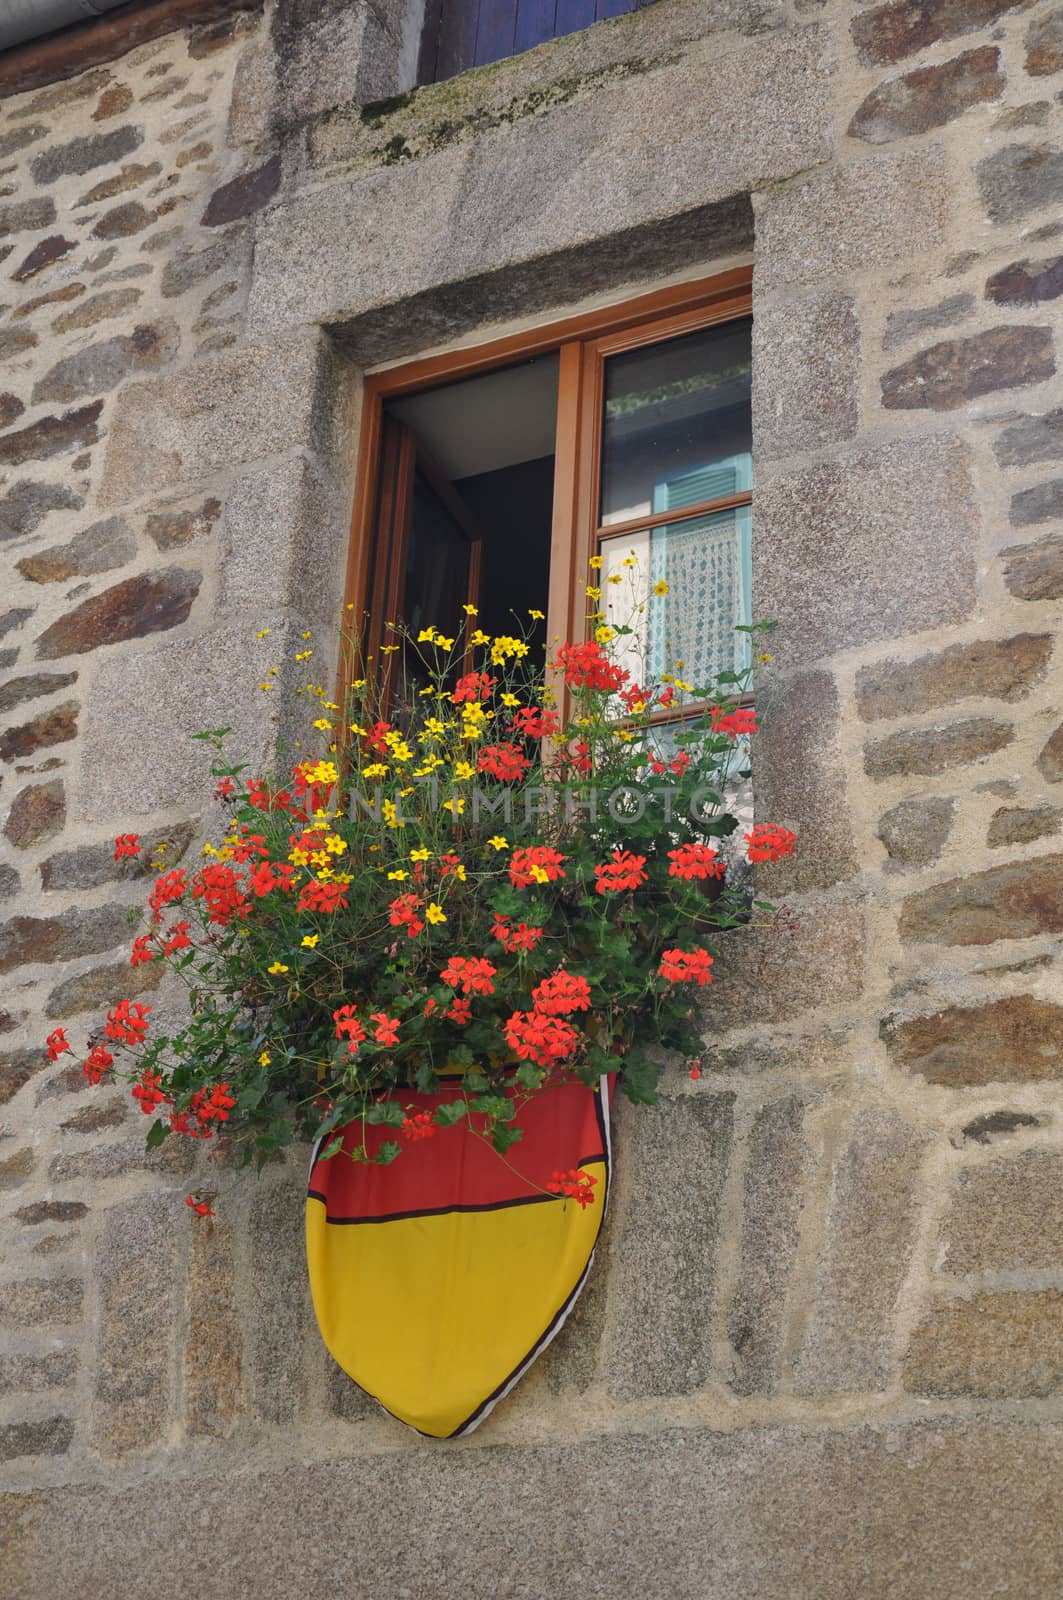 Medieval building with flowers. by dpe123